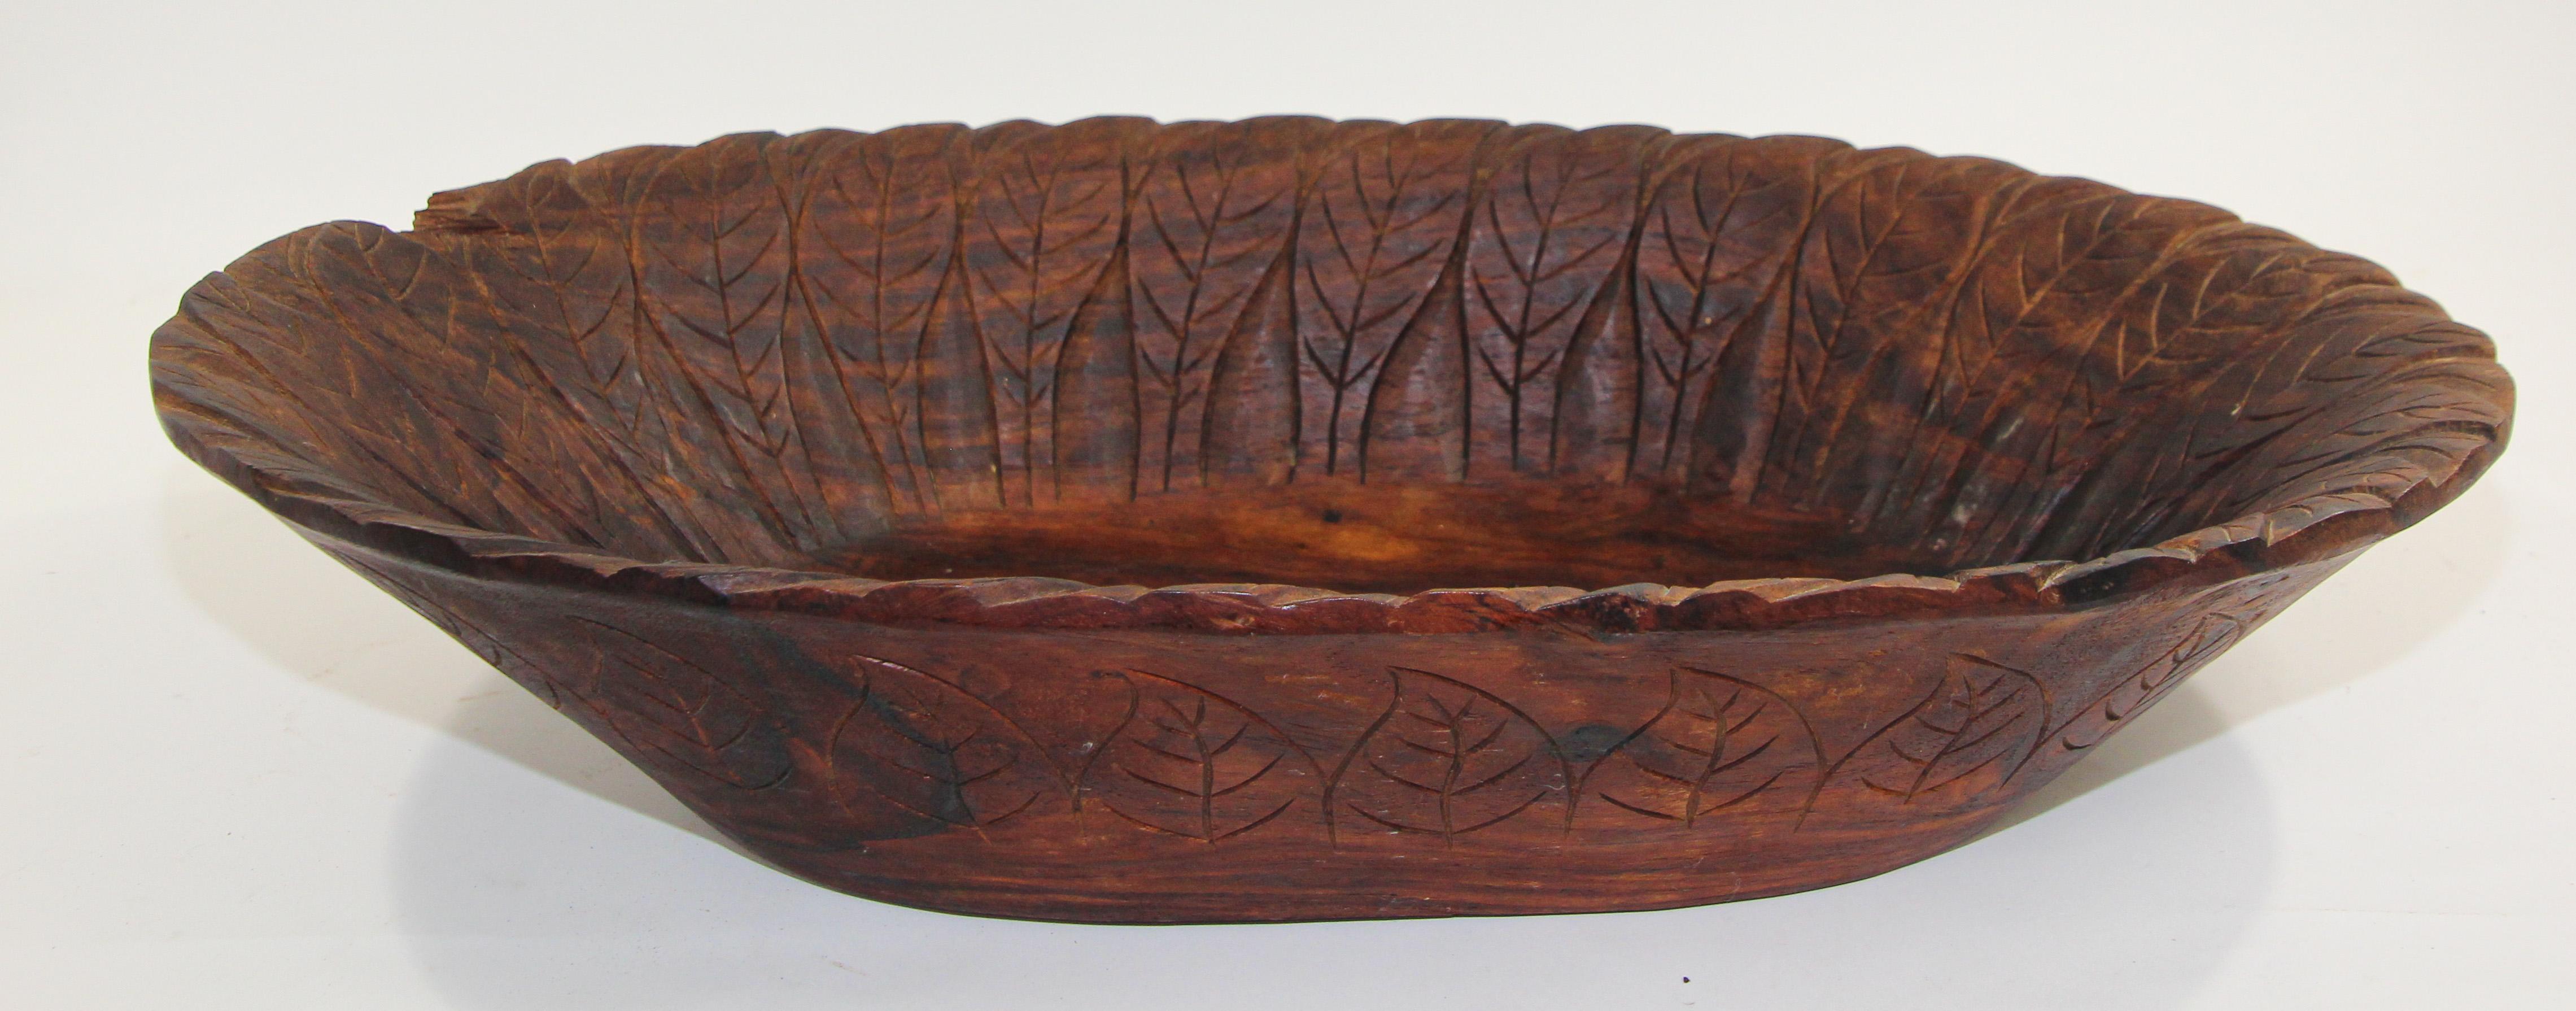 Large Hand-Carved Tribal Wooden Bowl from the Batak of Sumatra For Sale 6